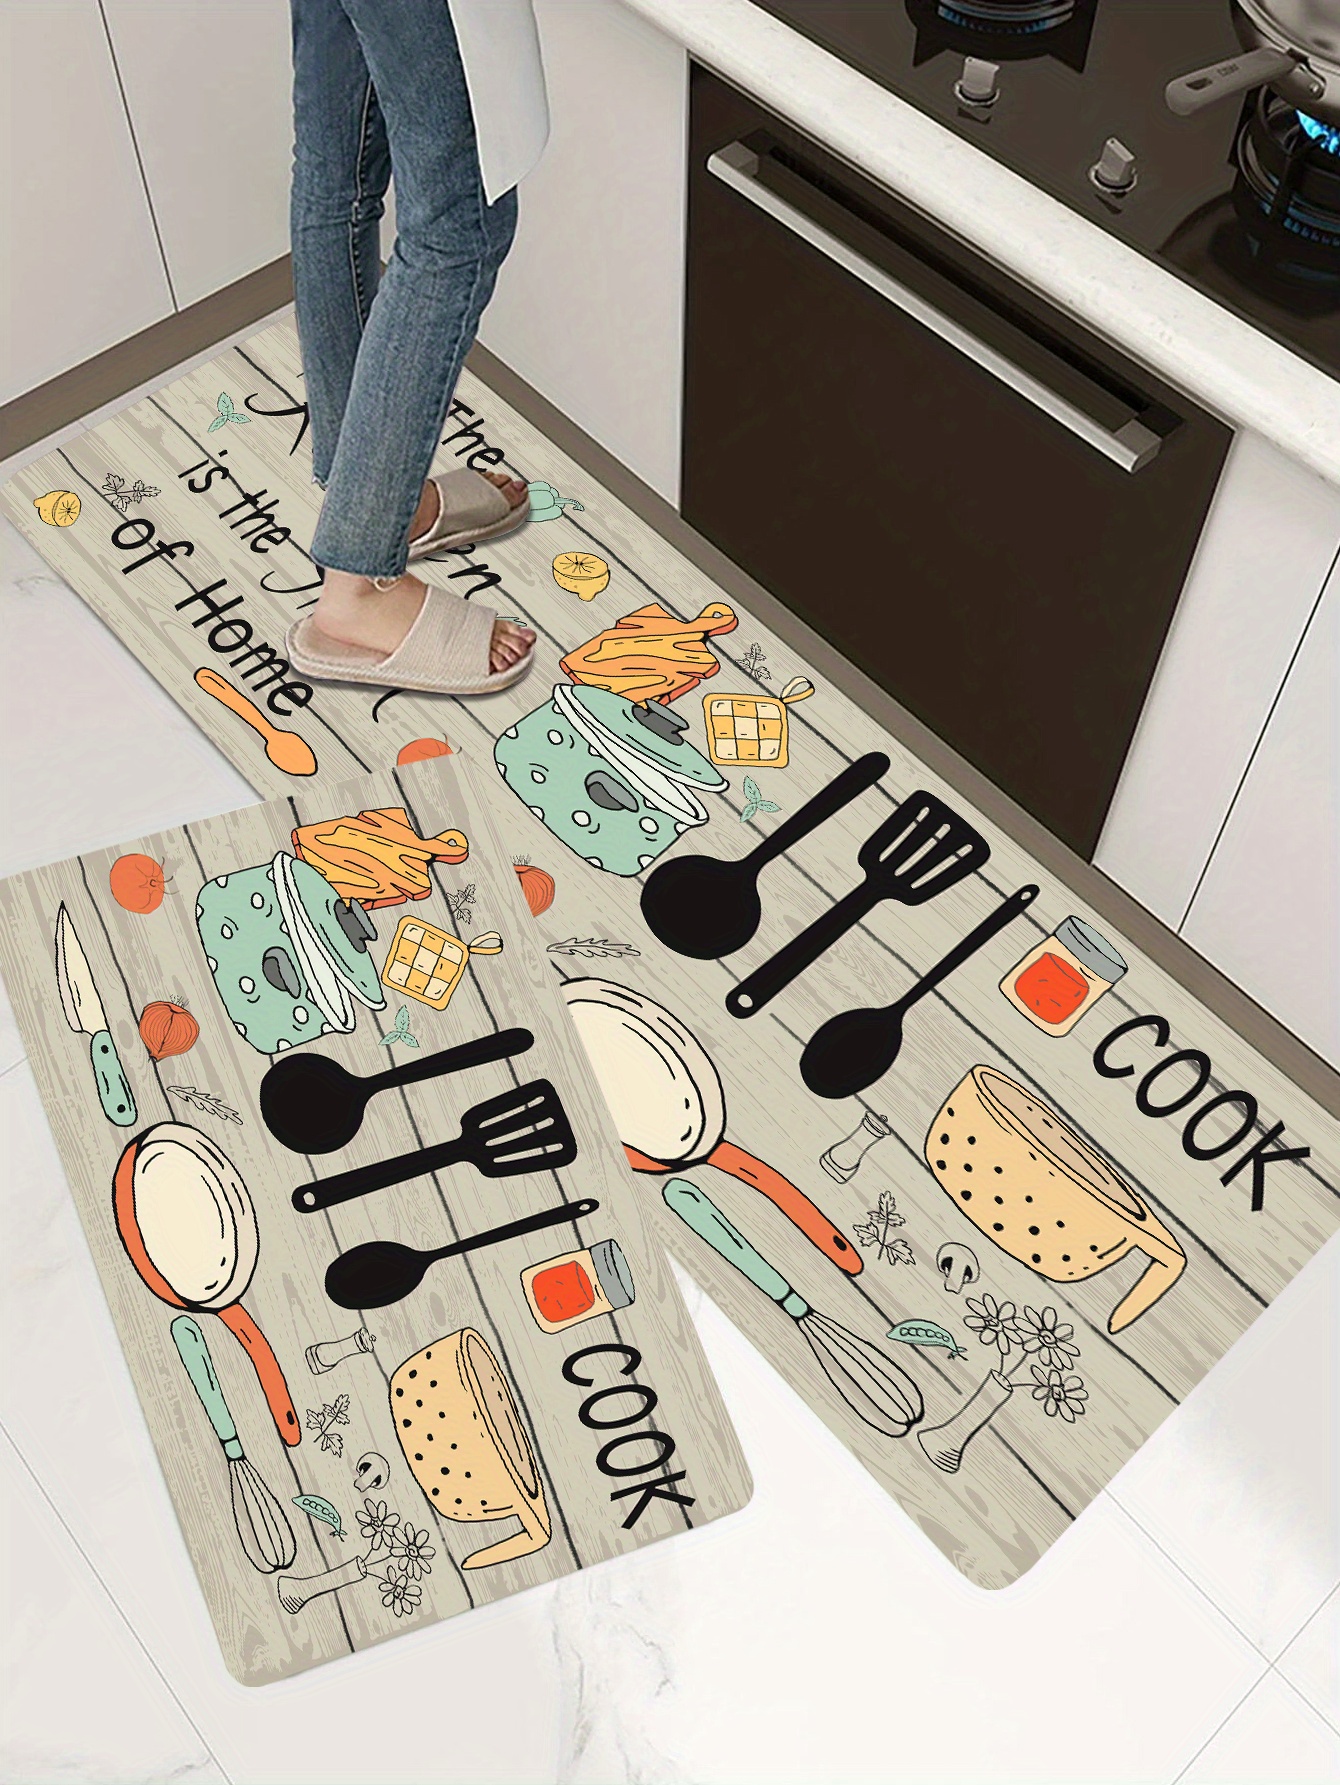 Long Kitchen Rugs Non Slip Washable Bath Mat Kitchen Runner Rug Honey  Bumble Bee Hive Cute Cartoon Water Absorption Quick Drying Anti Fatigue  Comfort